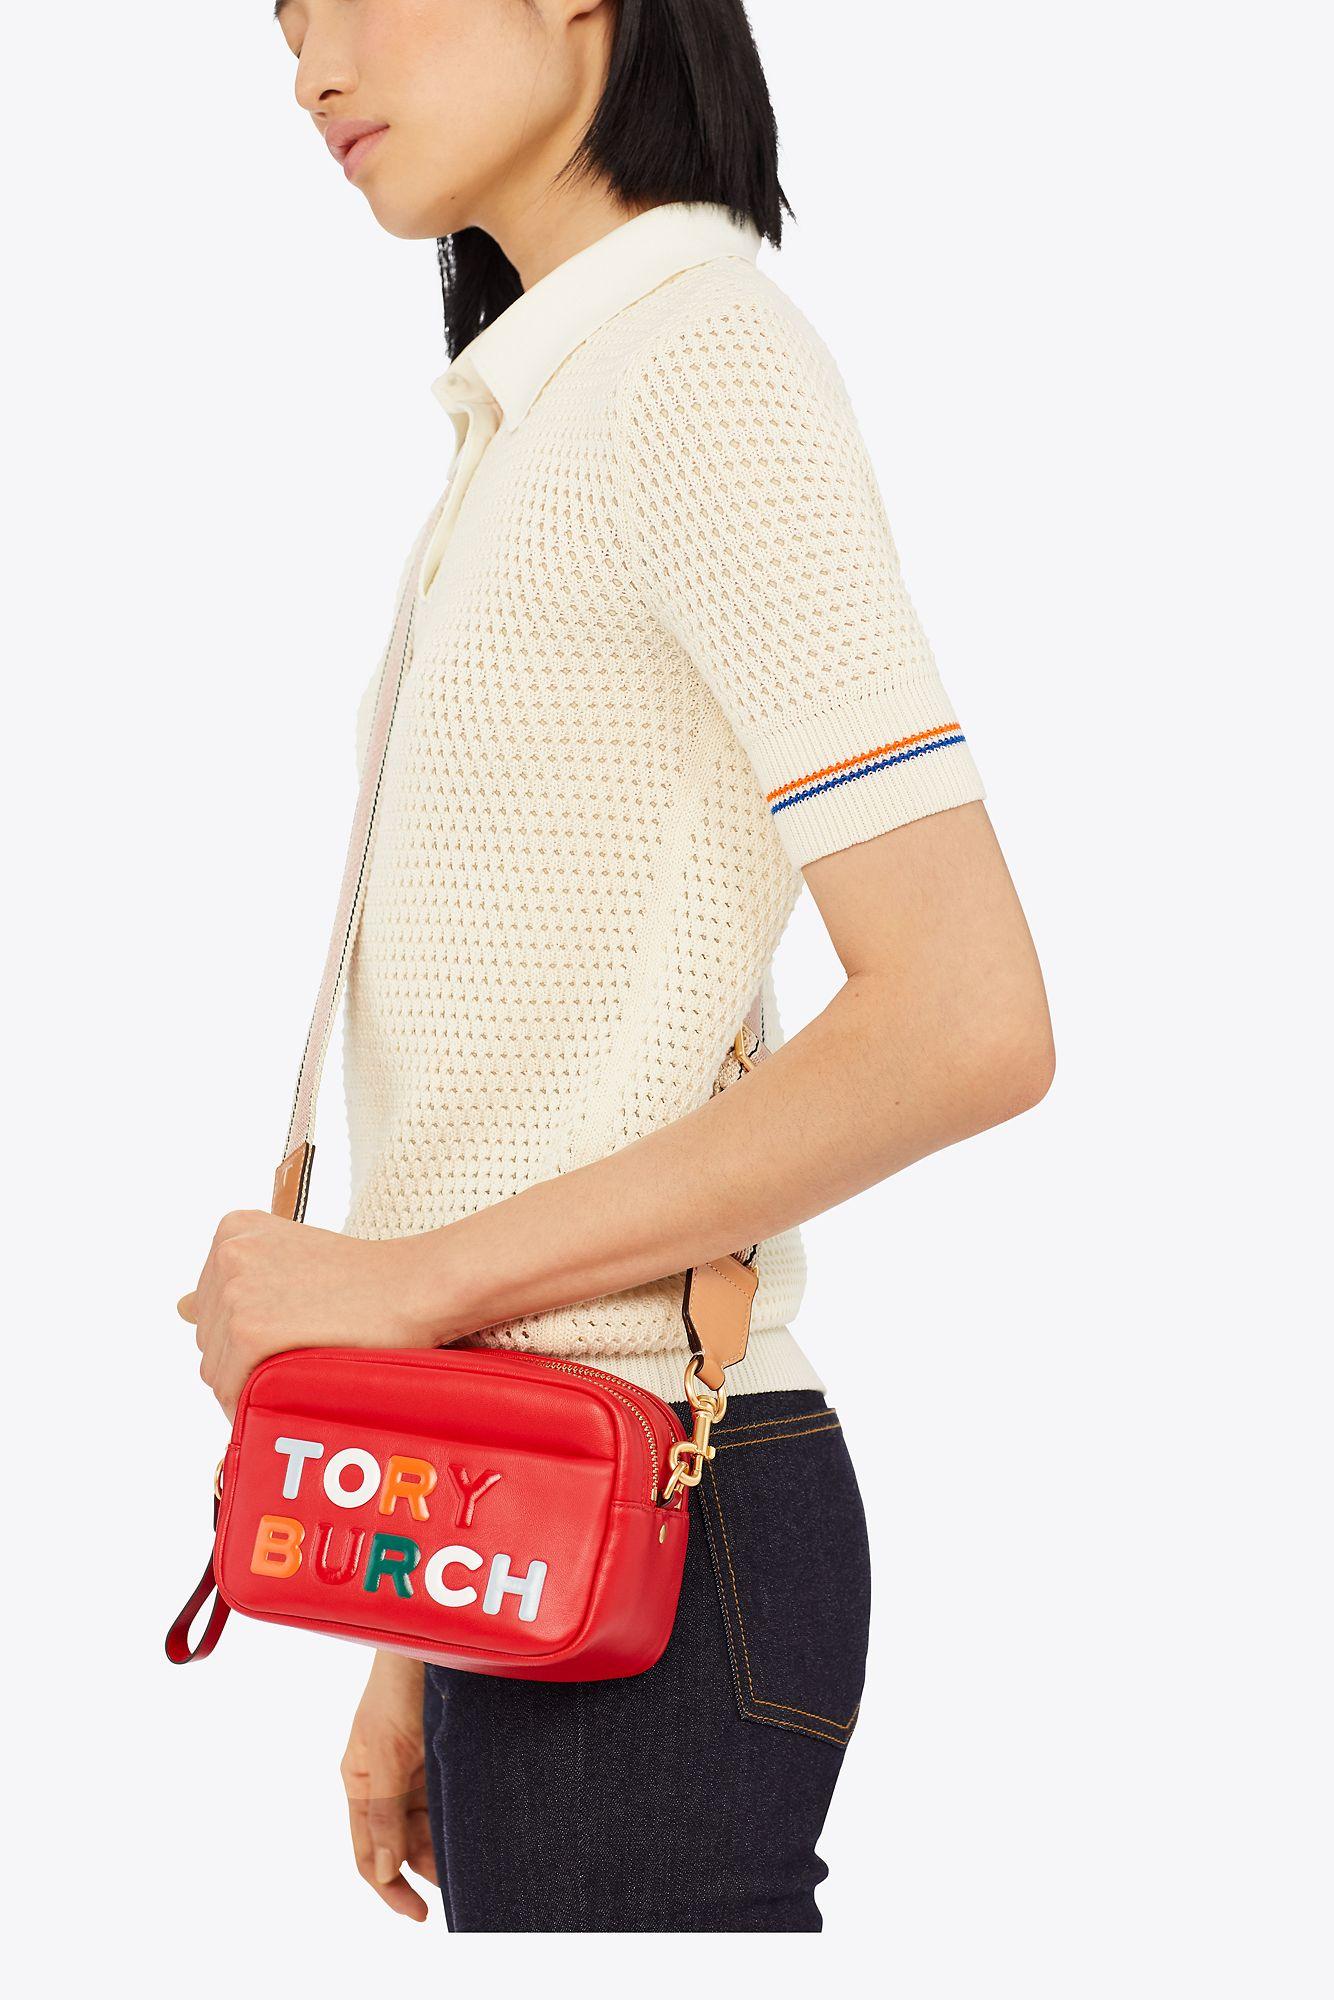 Tory Burch Perry Print Double-zip Mini Bag in Red | Lyst